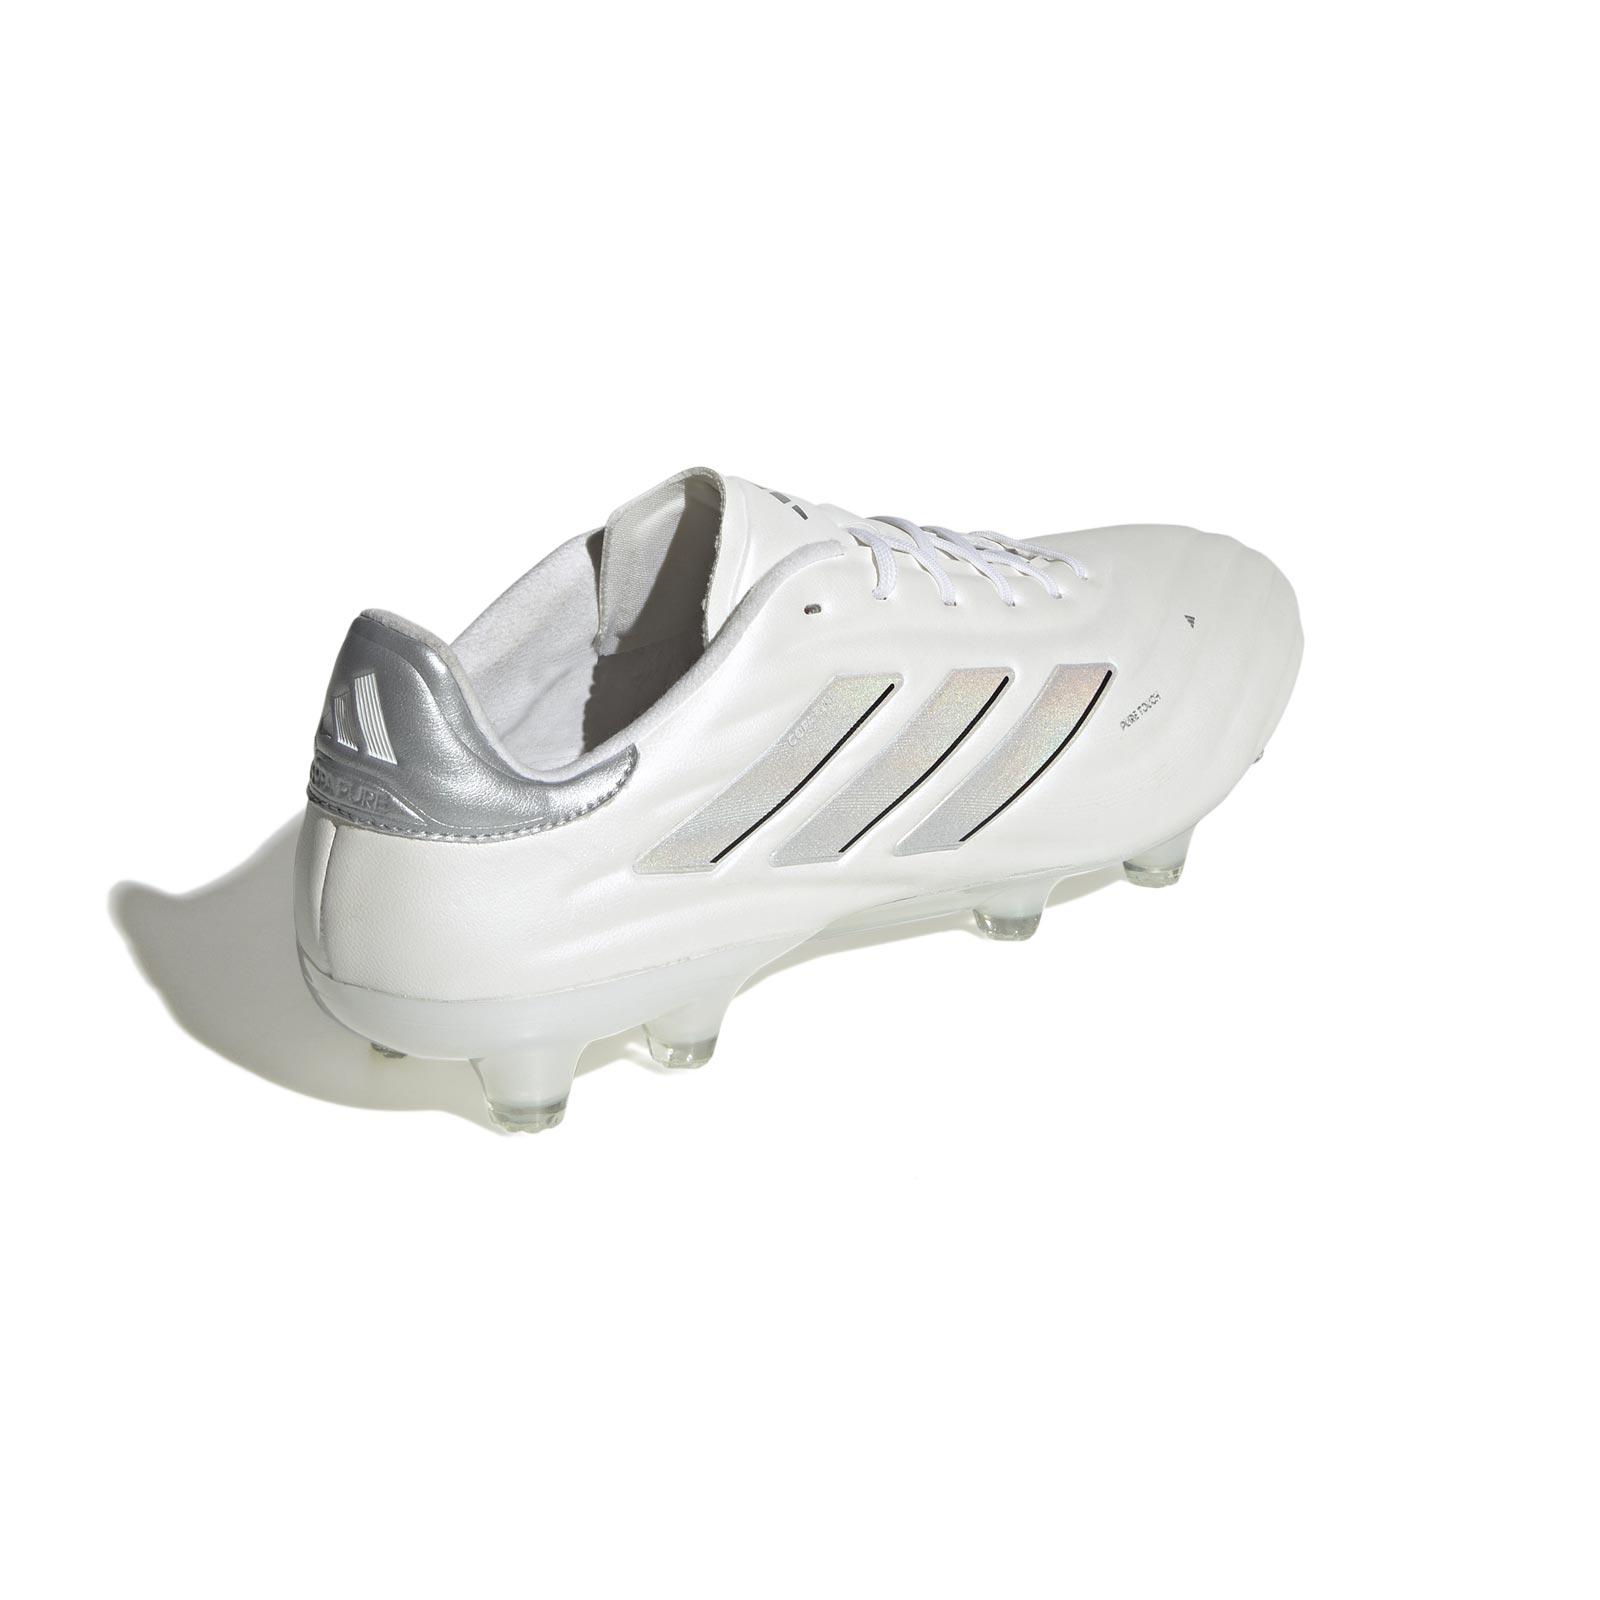 adidas Copa Pure 2 Elite Firm-Ground Boots